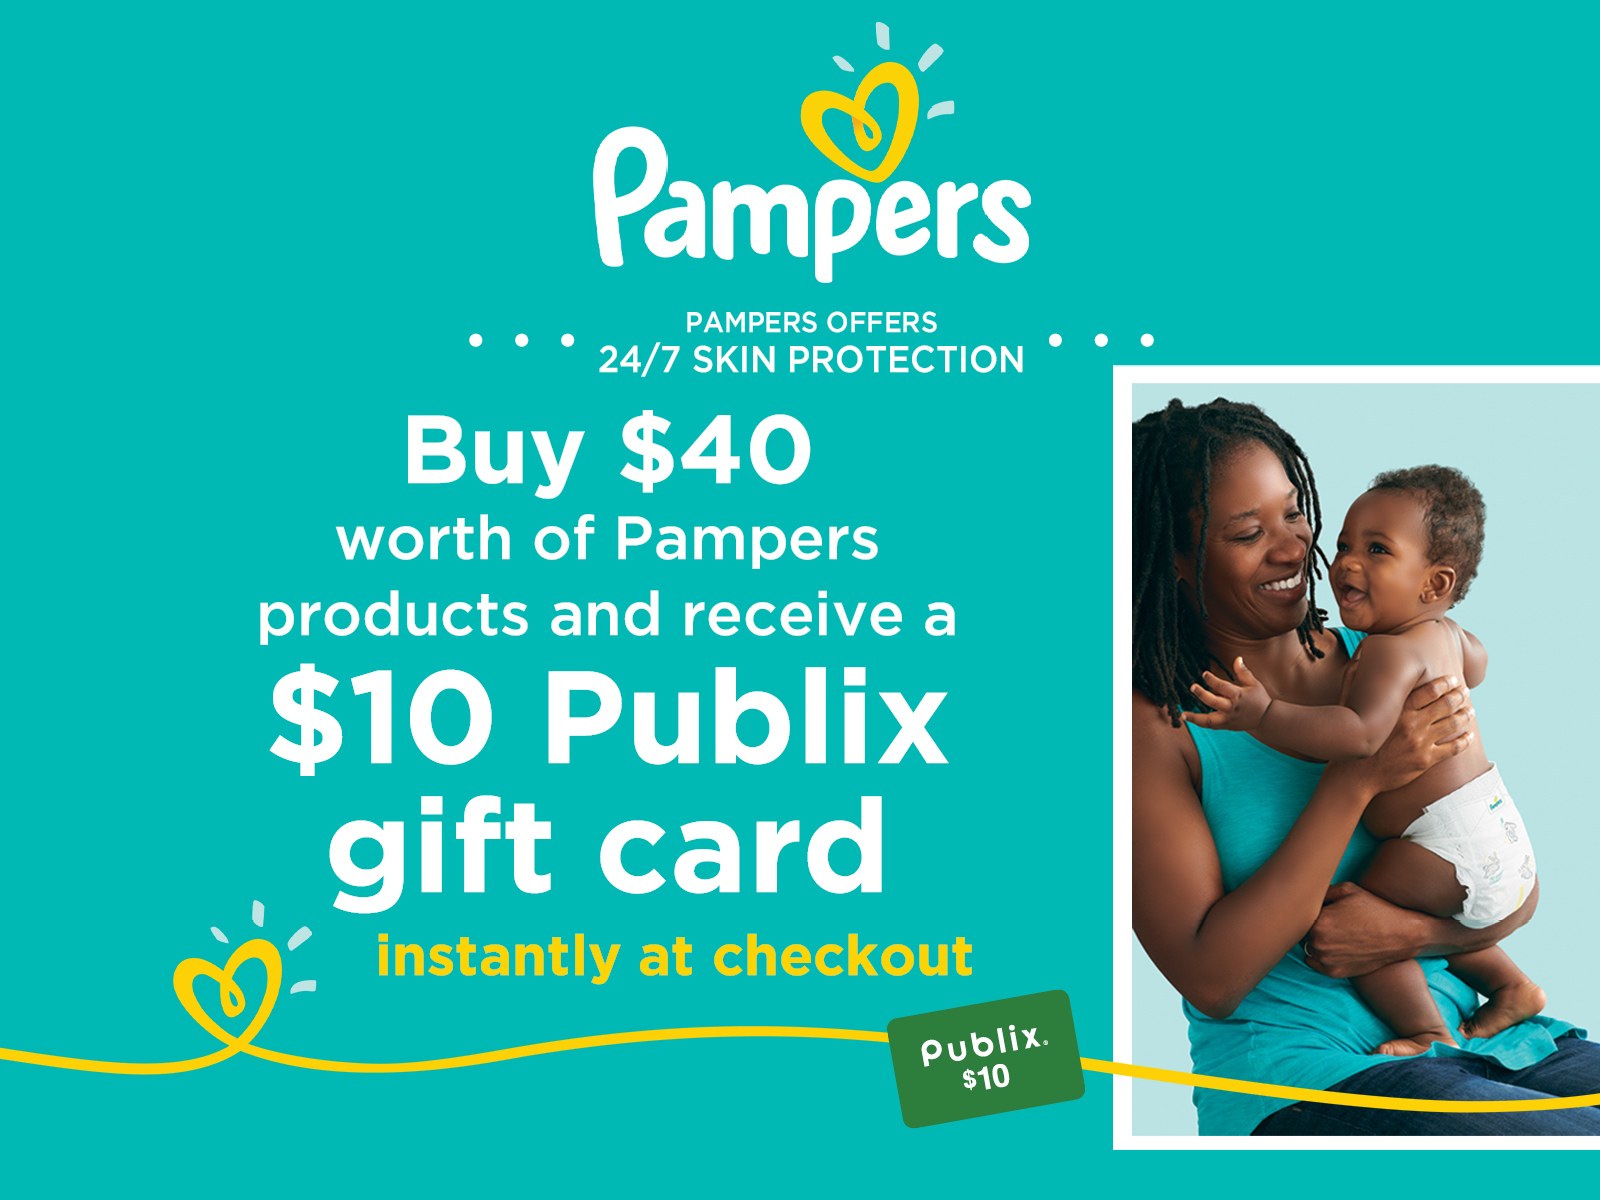 Can’t-Miss Deal On Pampers Products Available NOW At Publix